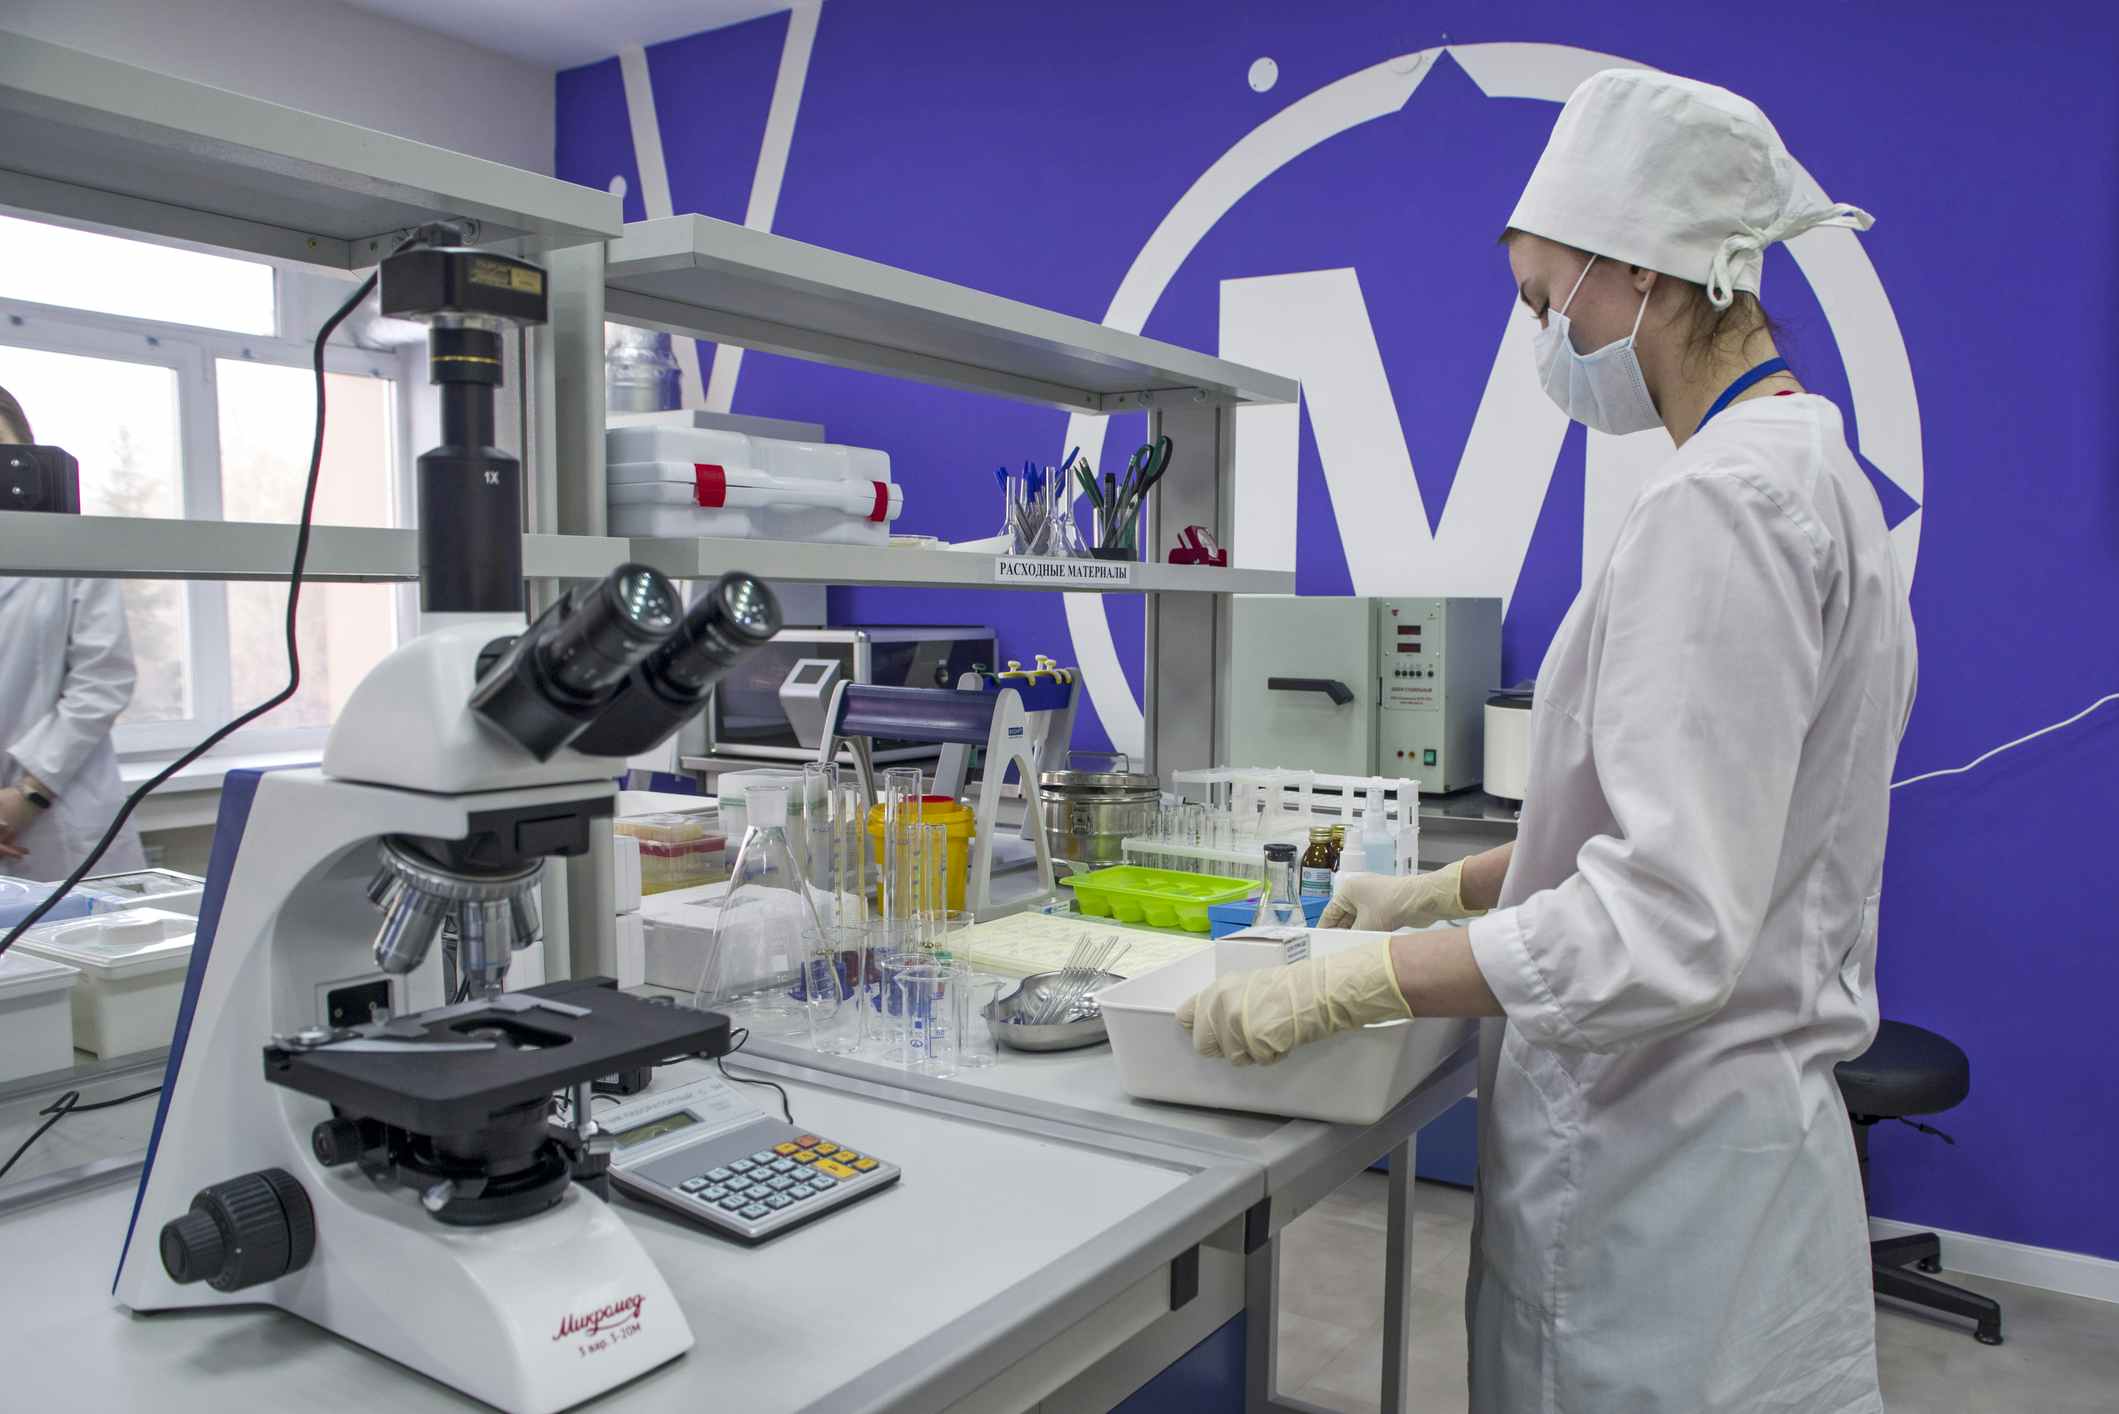 A medical student in a lab near a counter with microscopes and other medical lab equipment.